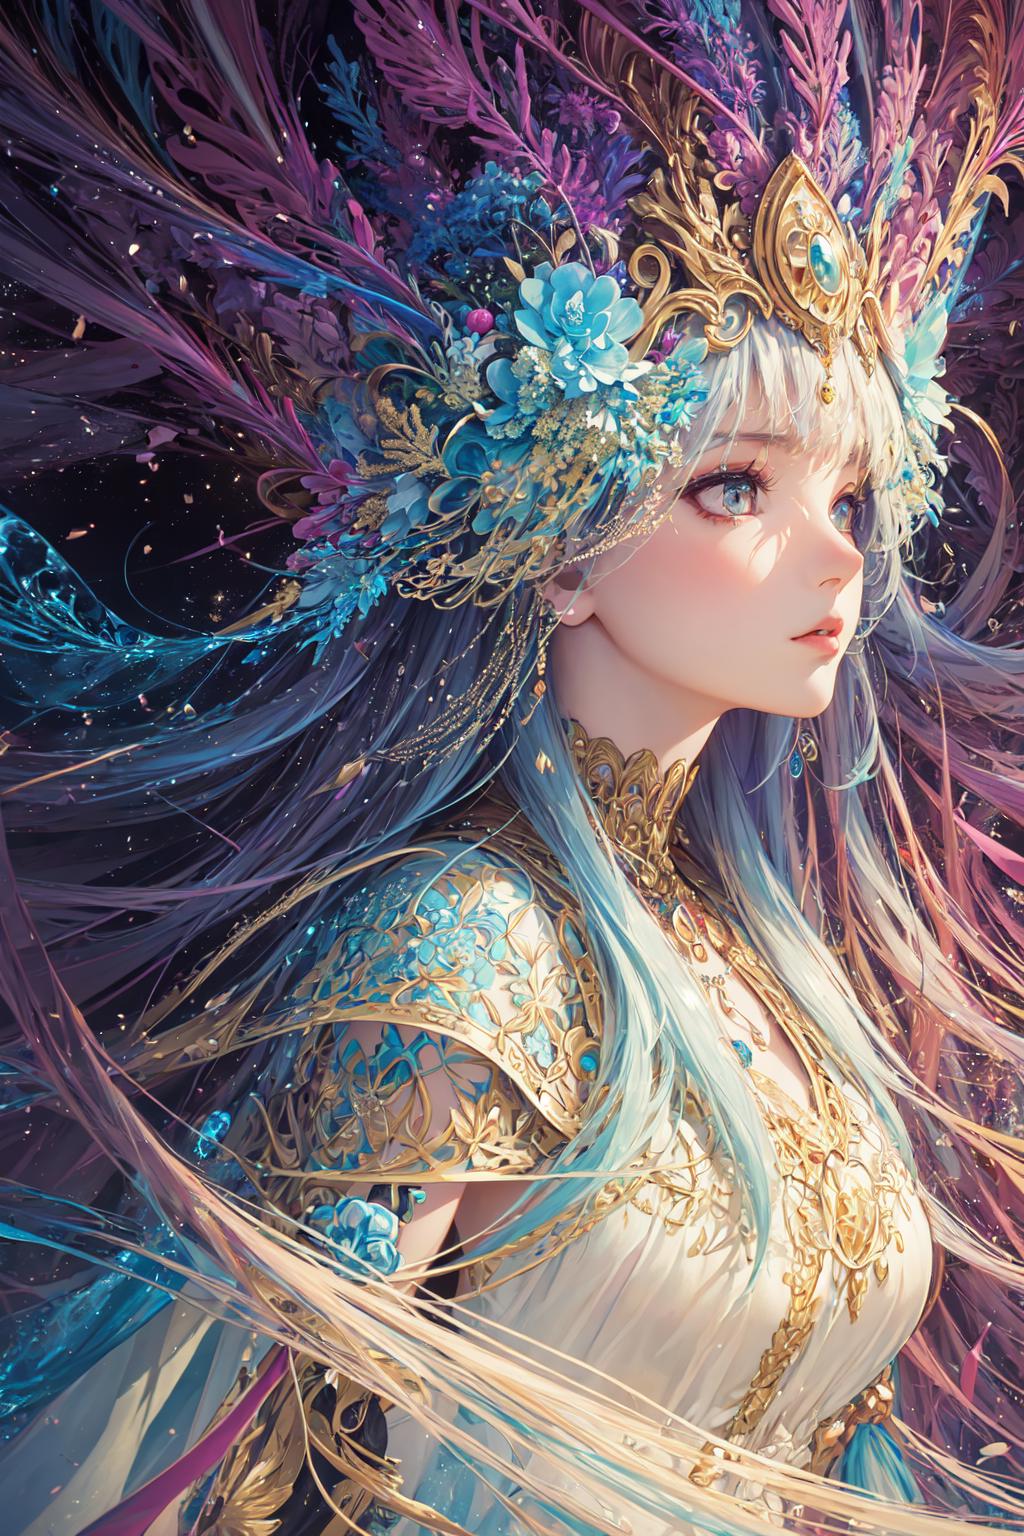 A beautifully drawn illustration of a woman with blue eyes, blue hair, and a crown of flowers.